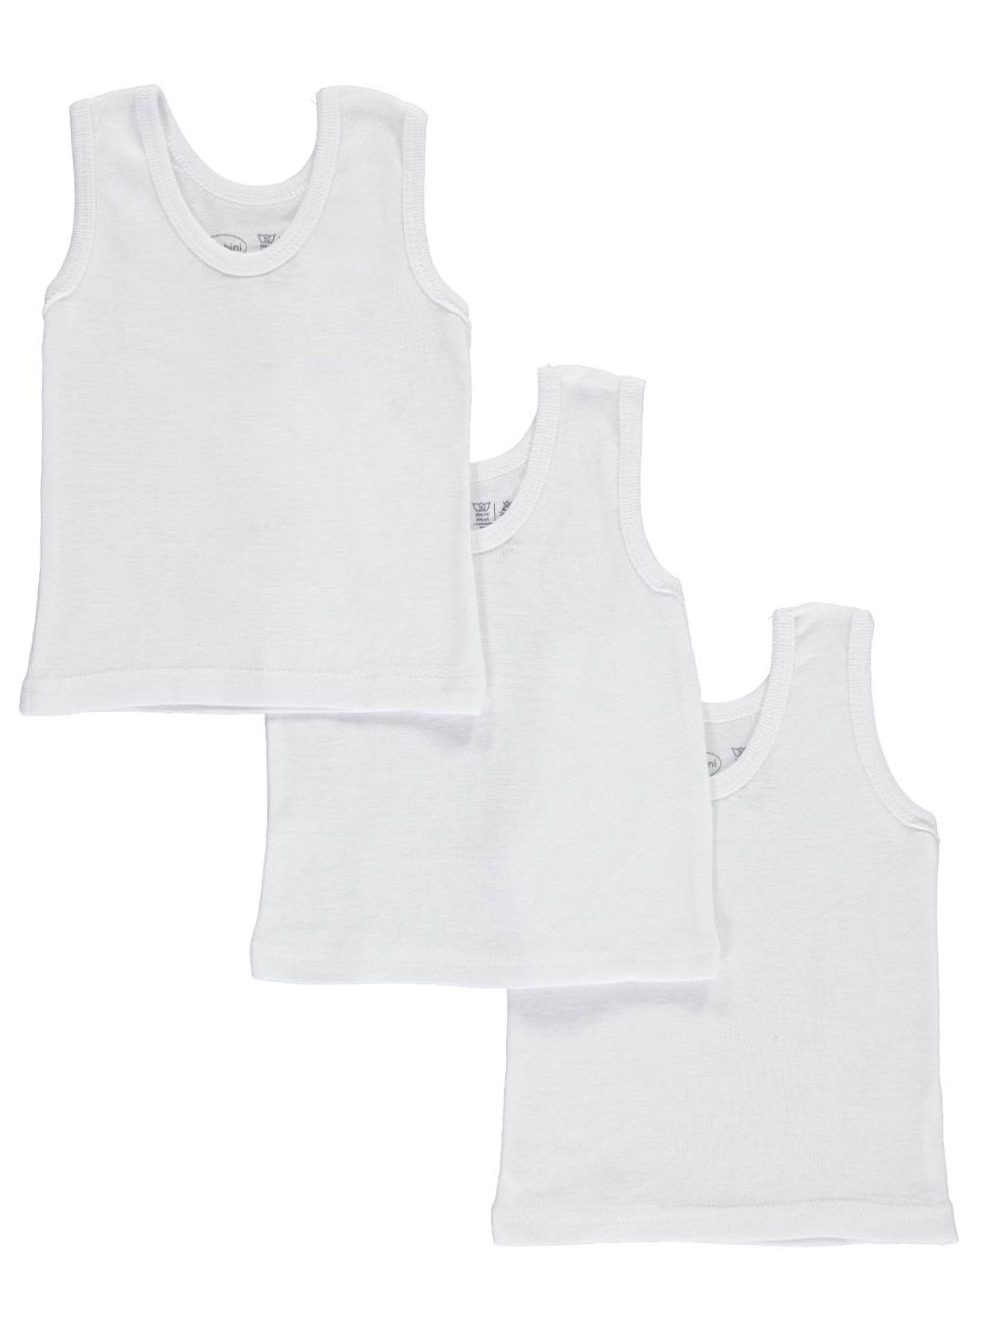 syndrom Seaboard Smag Bambini Unisex Baby 3-Pack Tank Tops